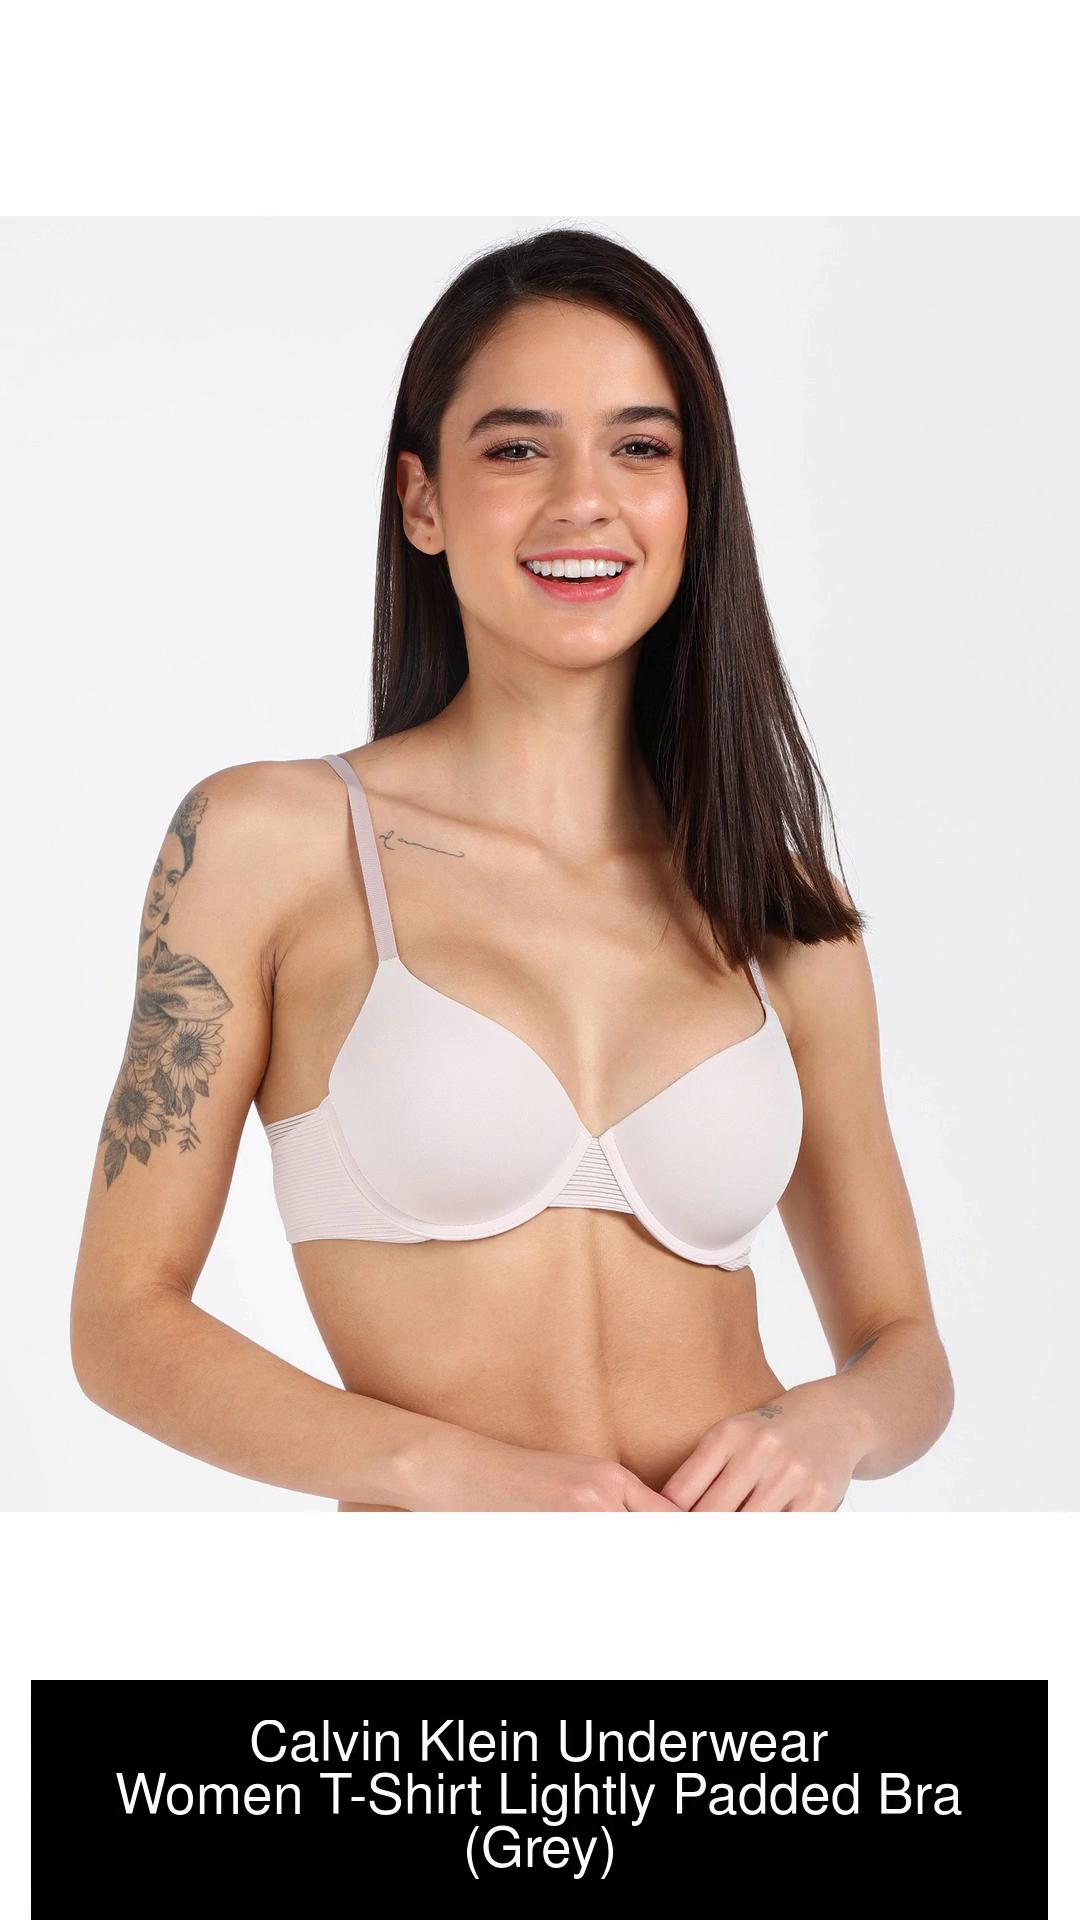 Calvin Klein Underwear BREATHABLE LIGHTLY LINED PERFECT COVERAGE